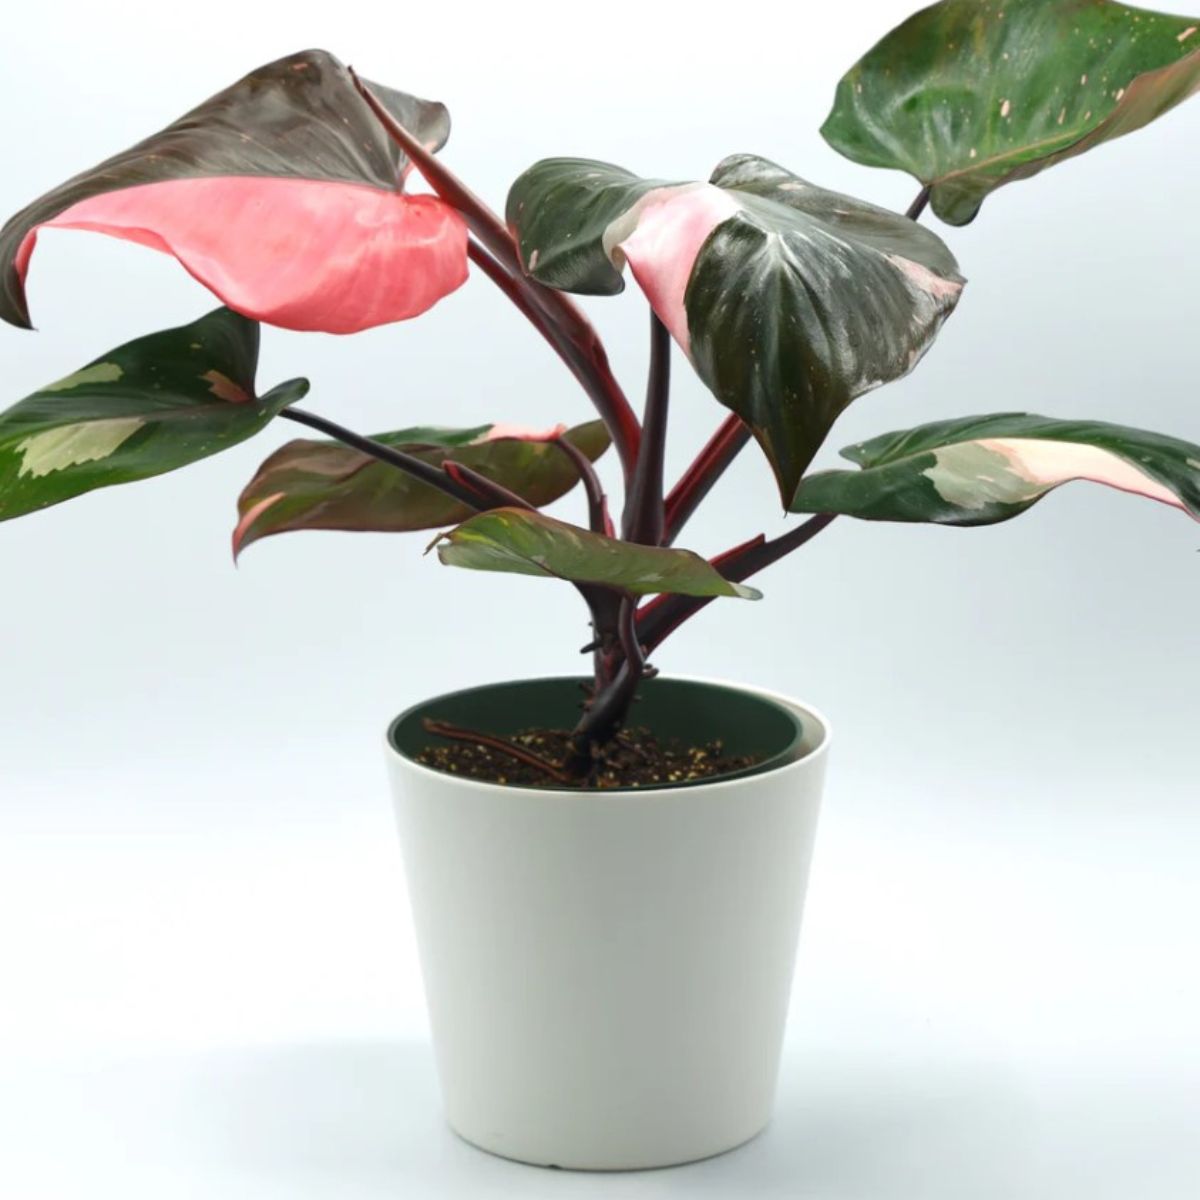 Philodendron Pink Princess is a rare variegated houseplant rapidly gaining popularity on Thursd